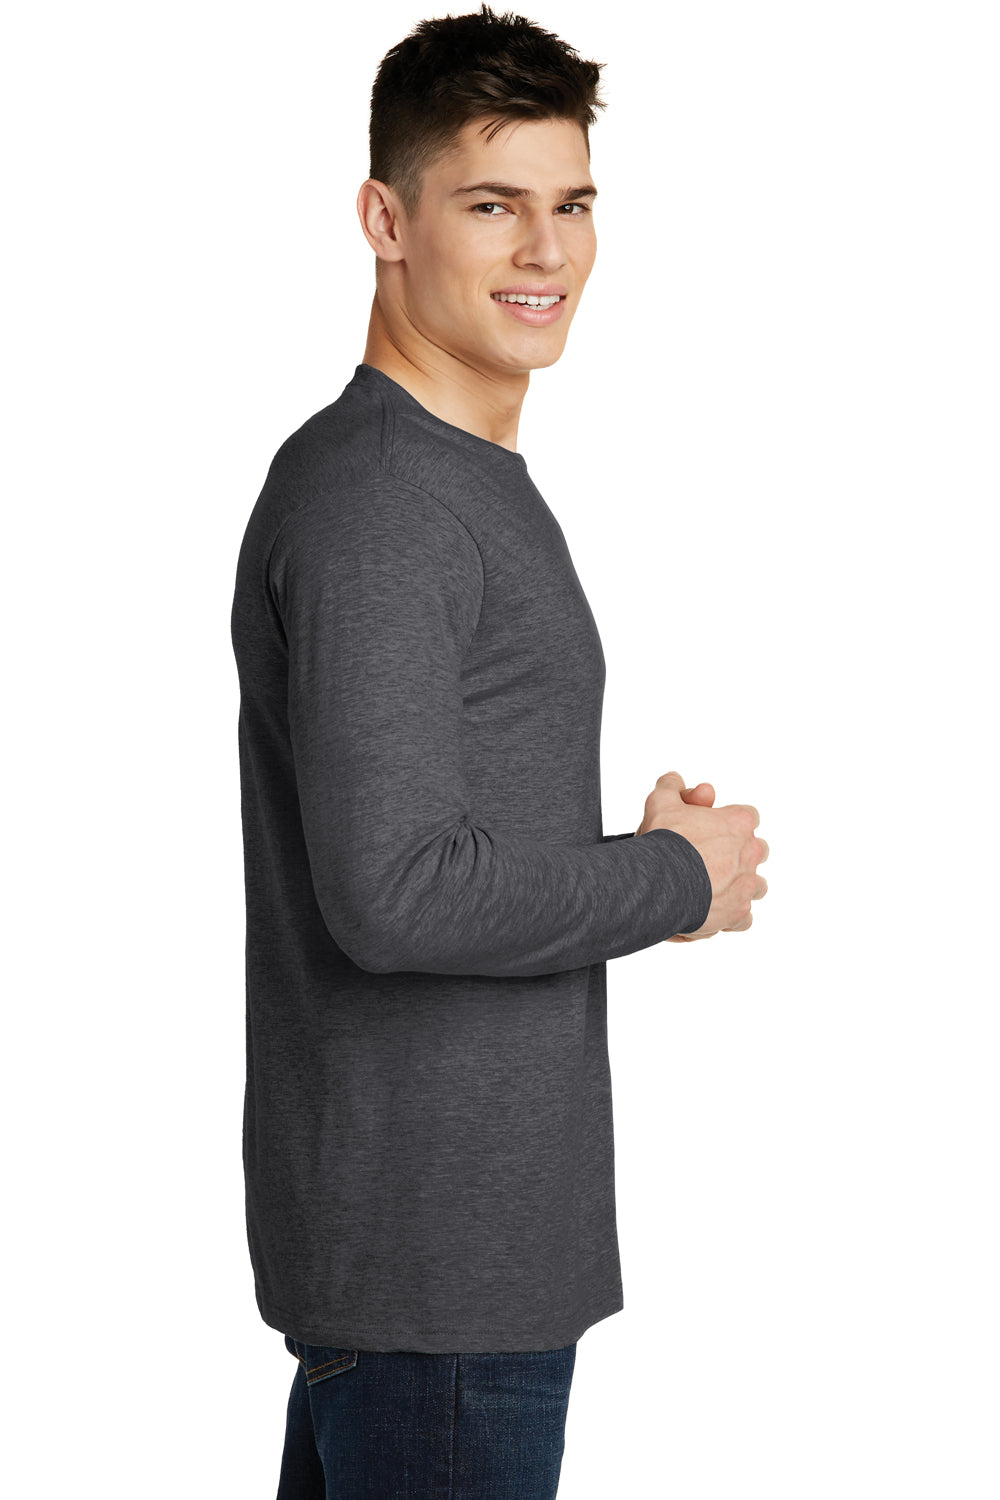 District DT6200 Mens Very Important Long Sleeve Crewneck T-Shirt Heather Charcoal Grey Side